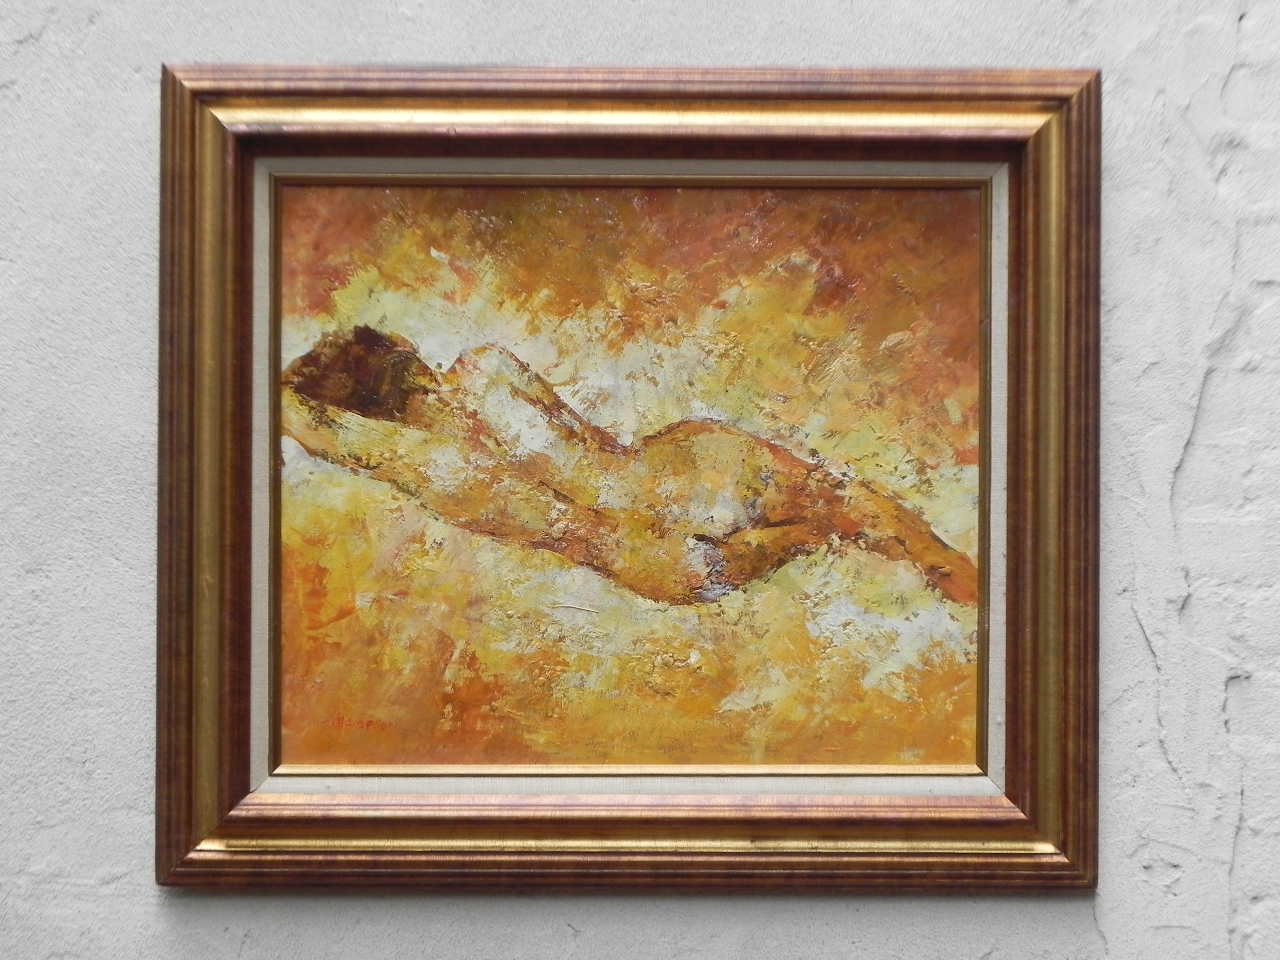 I Like Mike's Mid Century Modern Wall Decor & Art Nude Reclining in Yellows and Oranges, Oil on Canvas